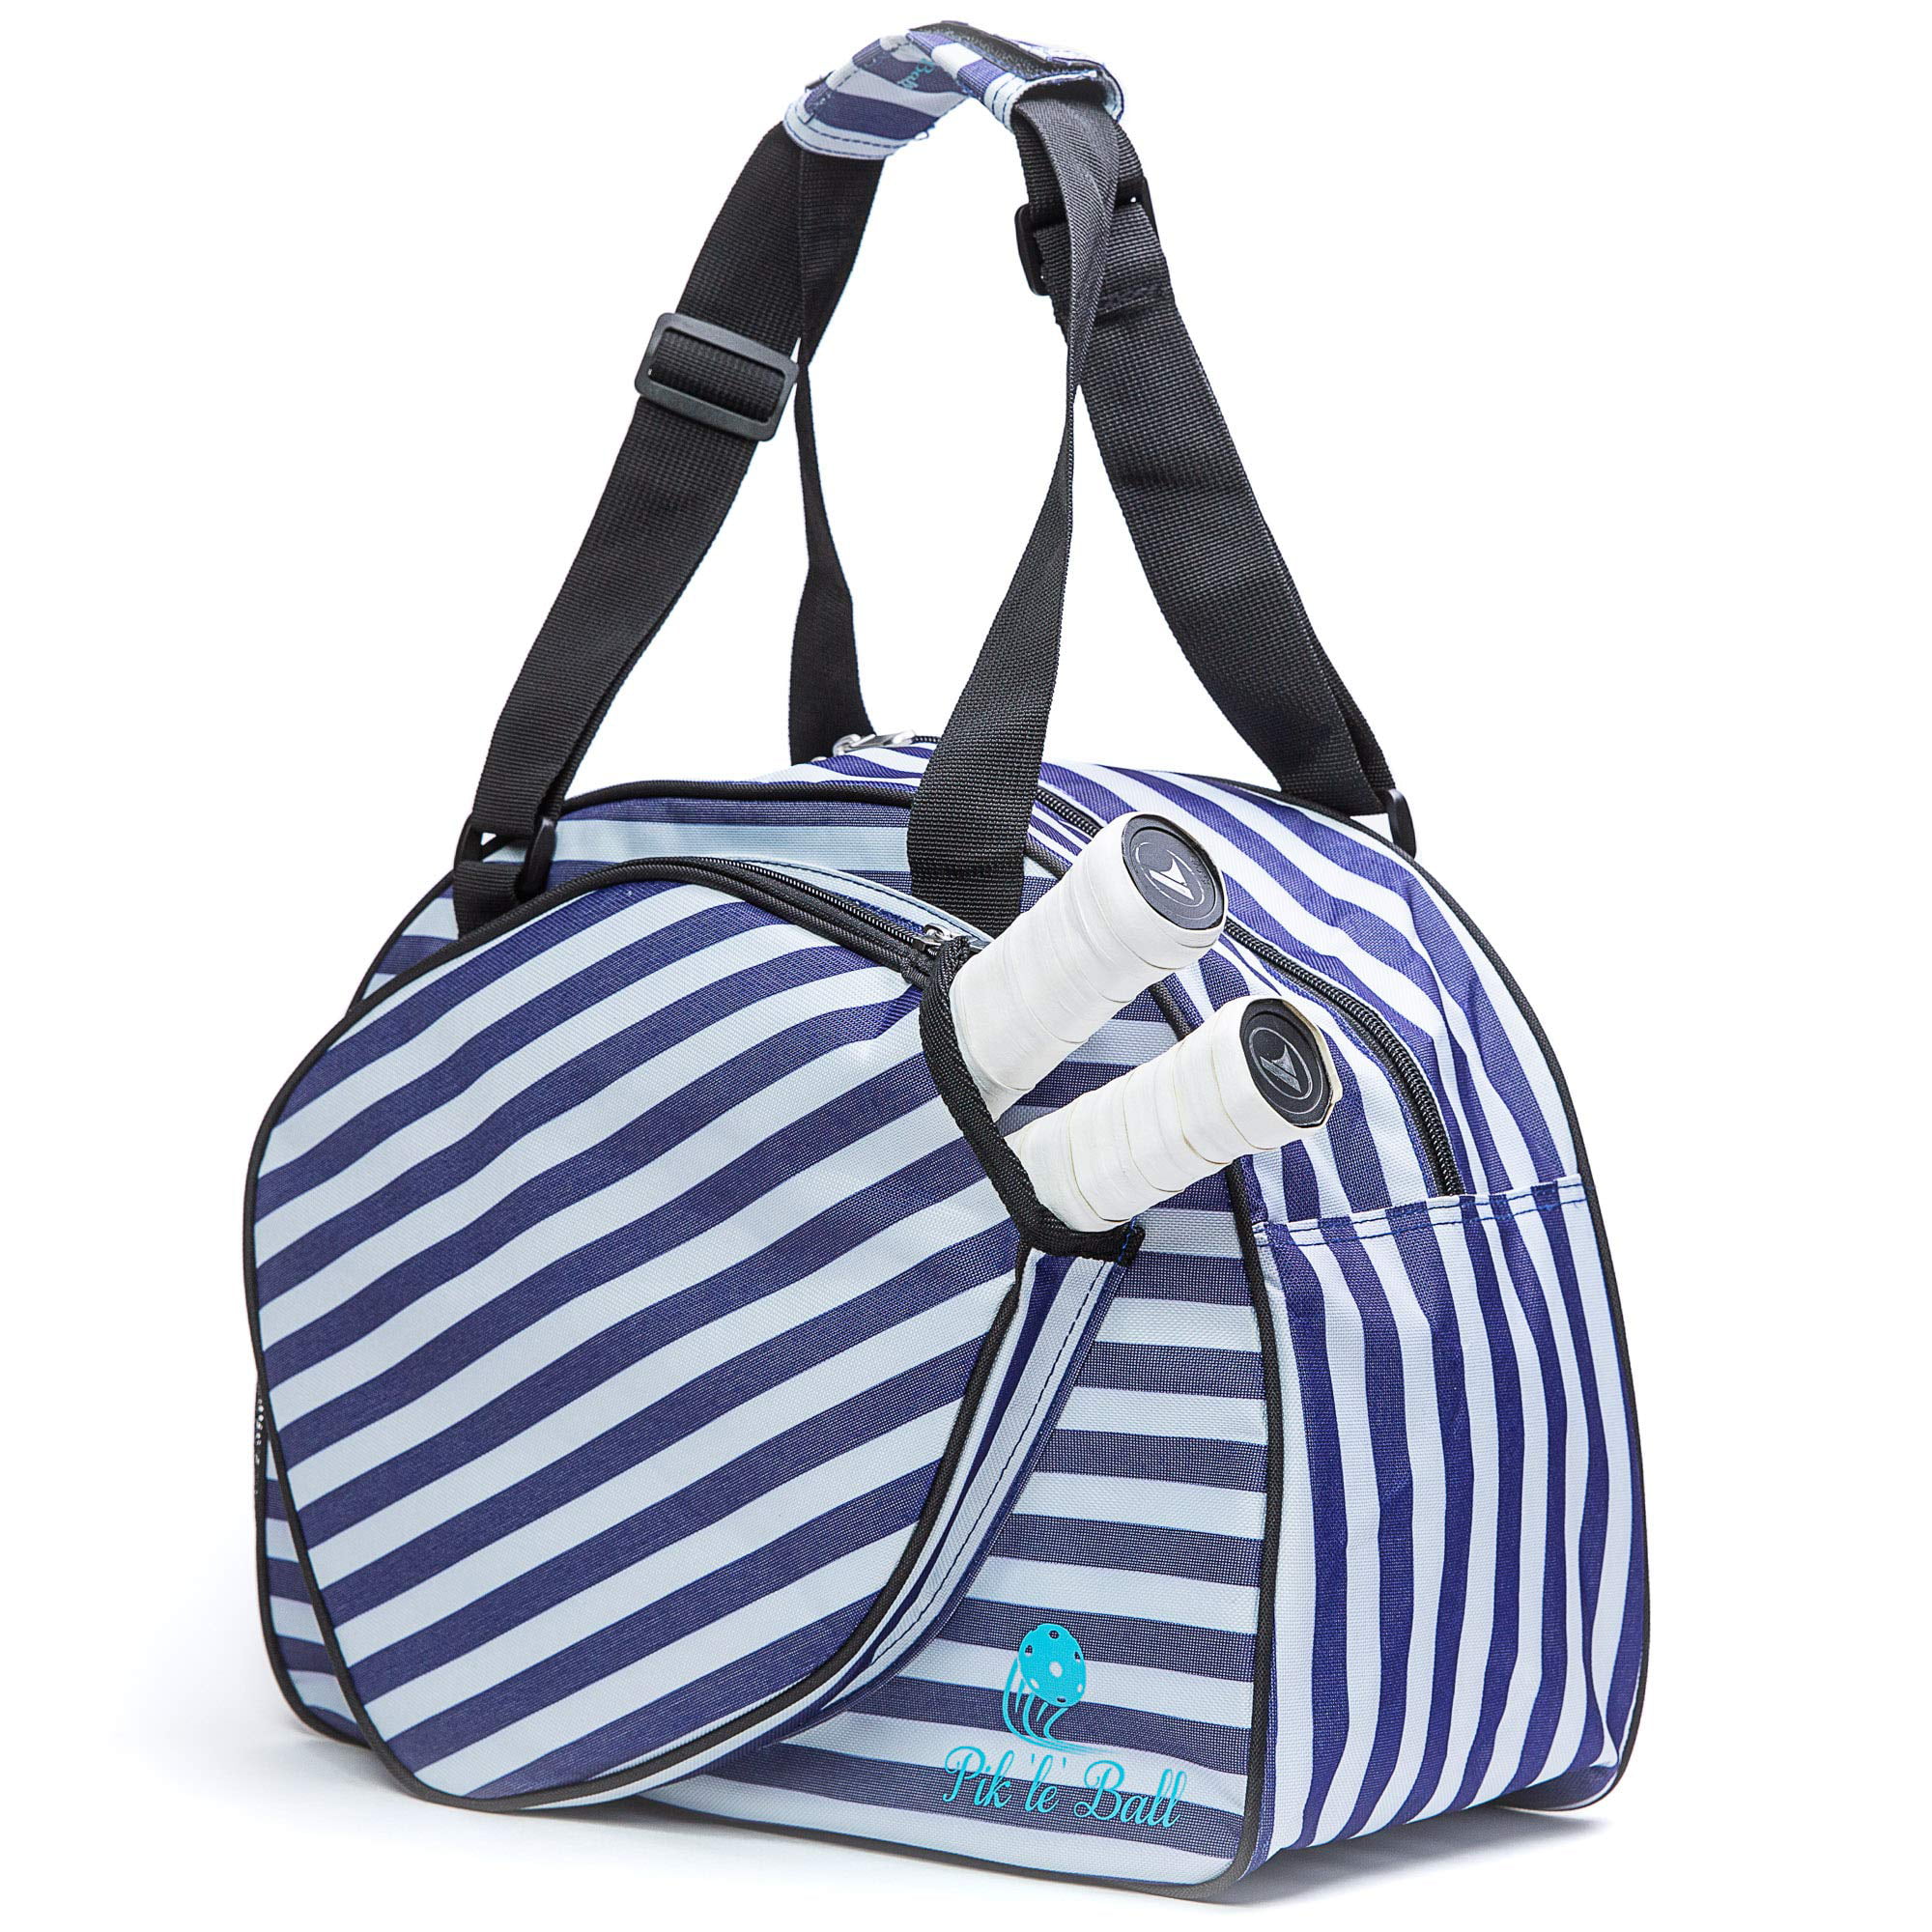 Striped Women's Duffle Bag Blue & Wht Made exclusively for Pickleball! 